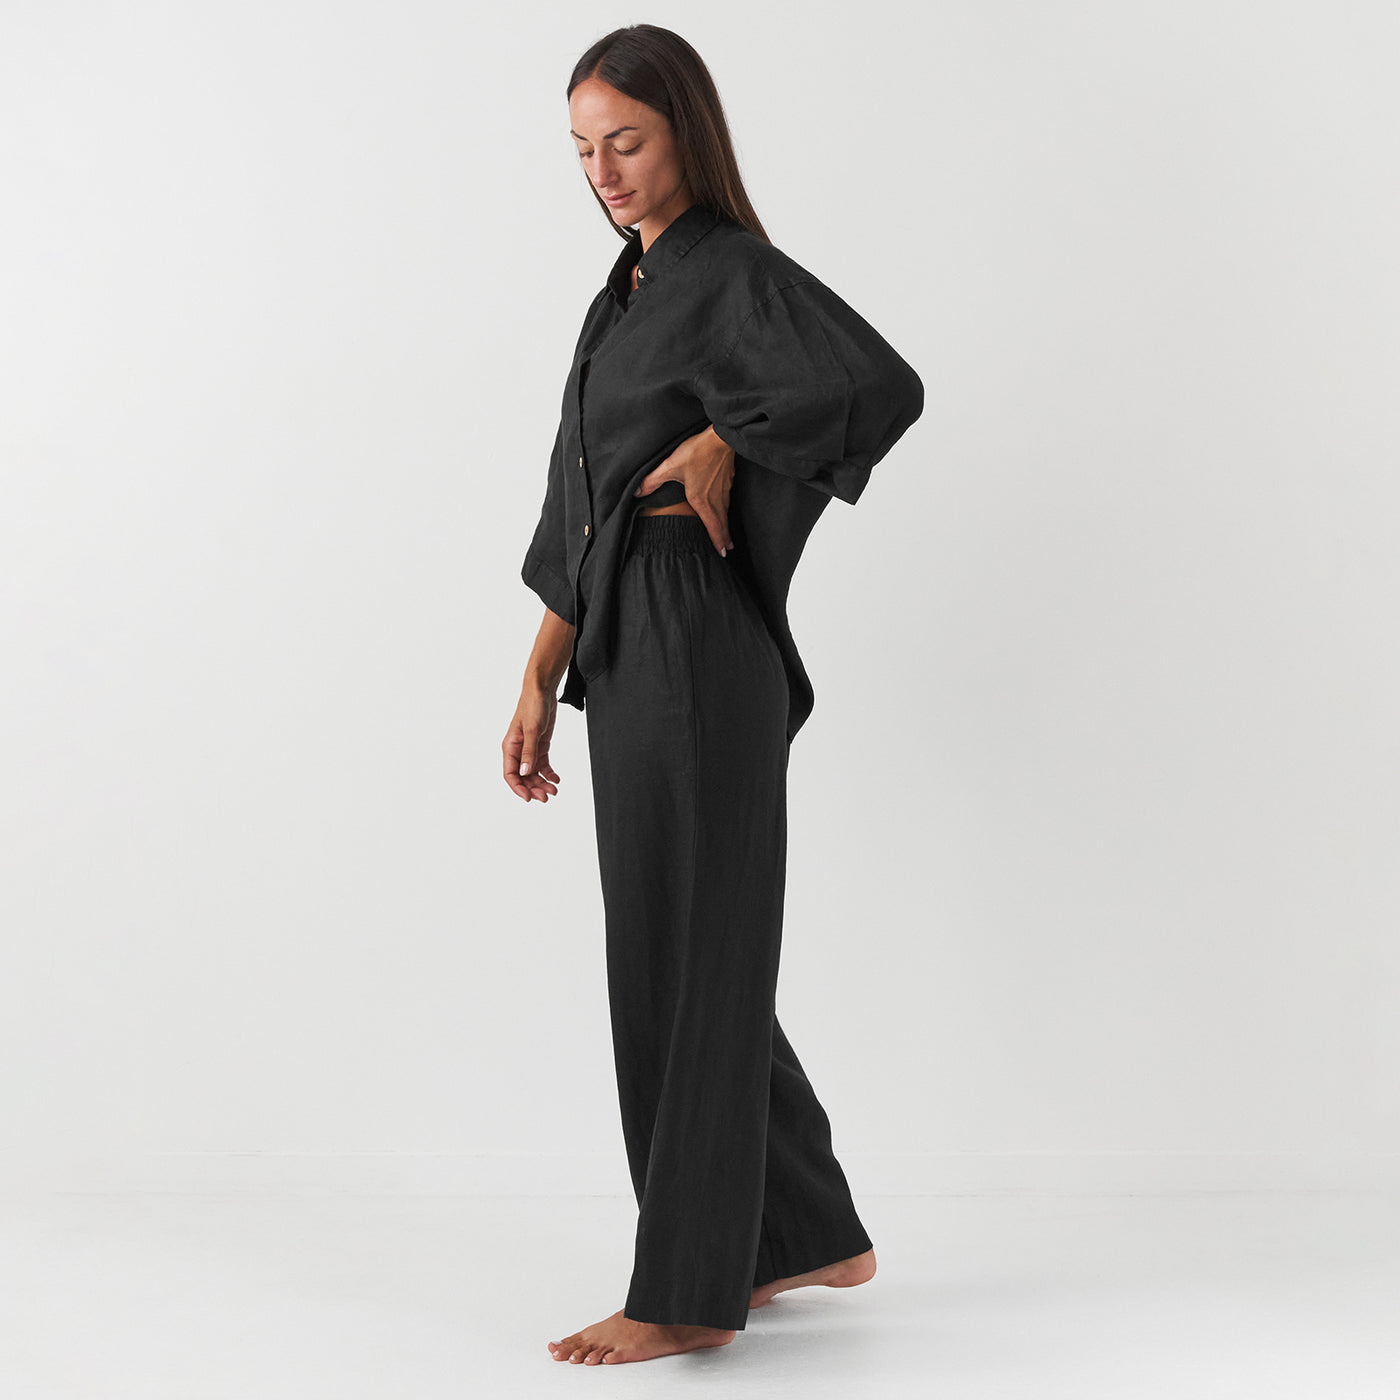 French Flax Linen Lounge Pant in Black